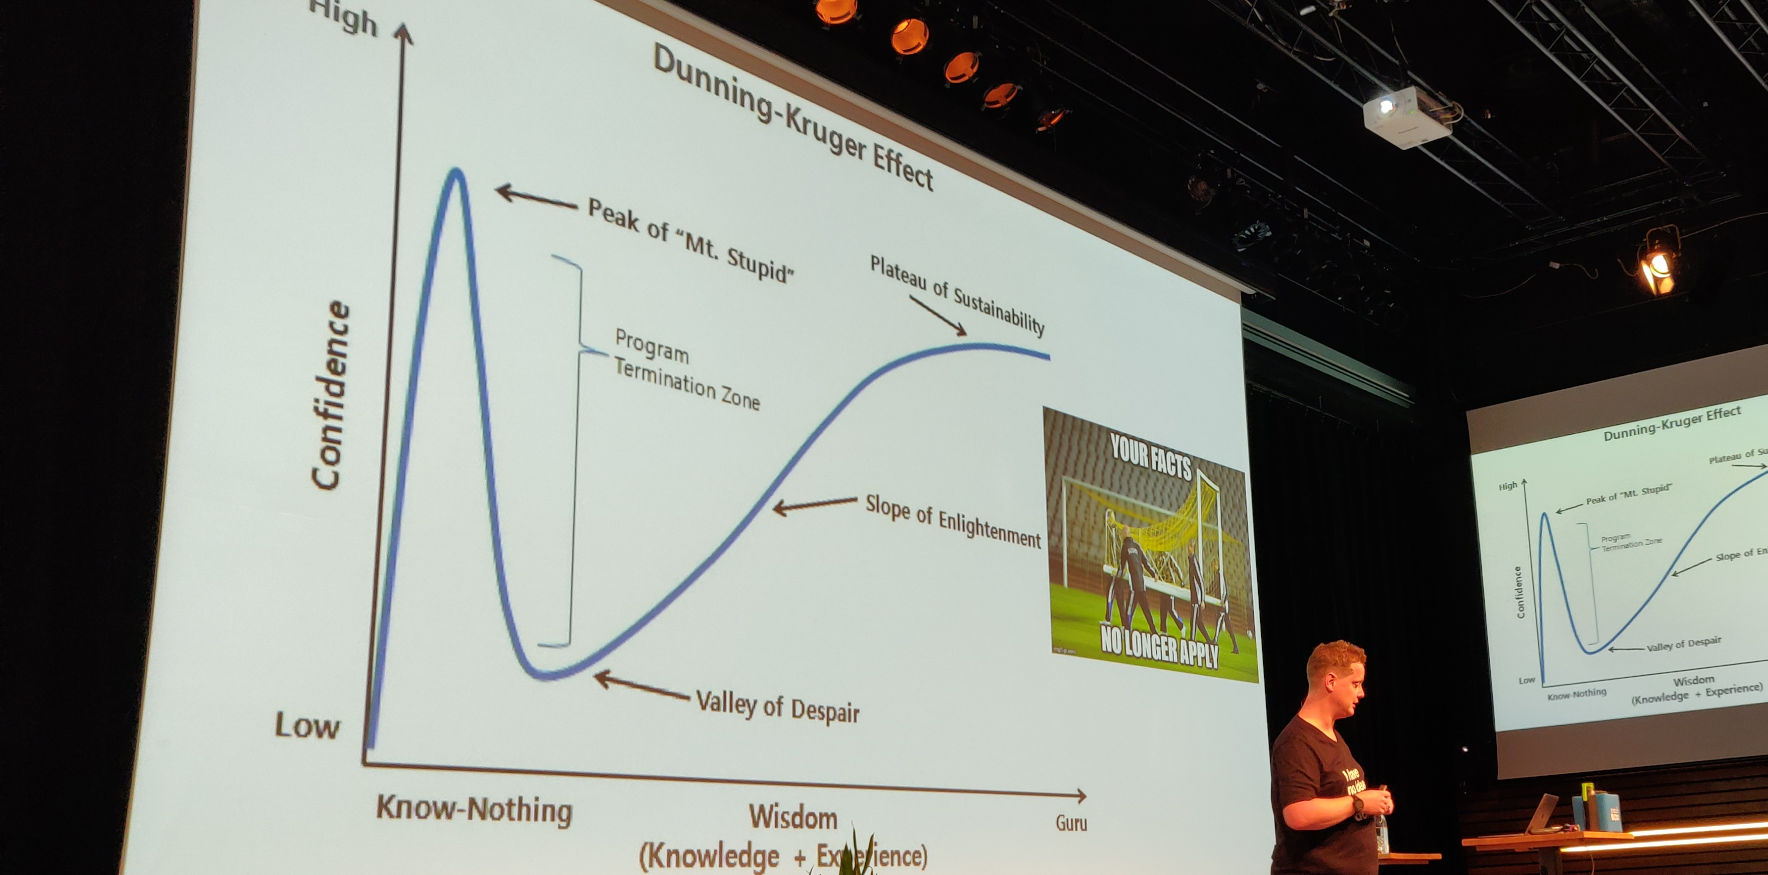 Joep Piscaer about the Dunning-Kruger effect